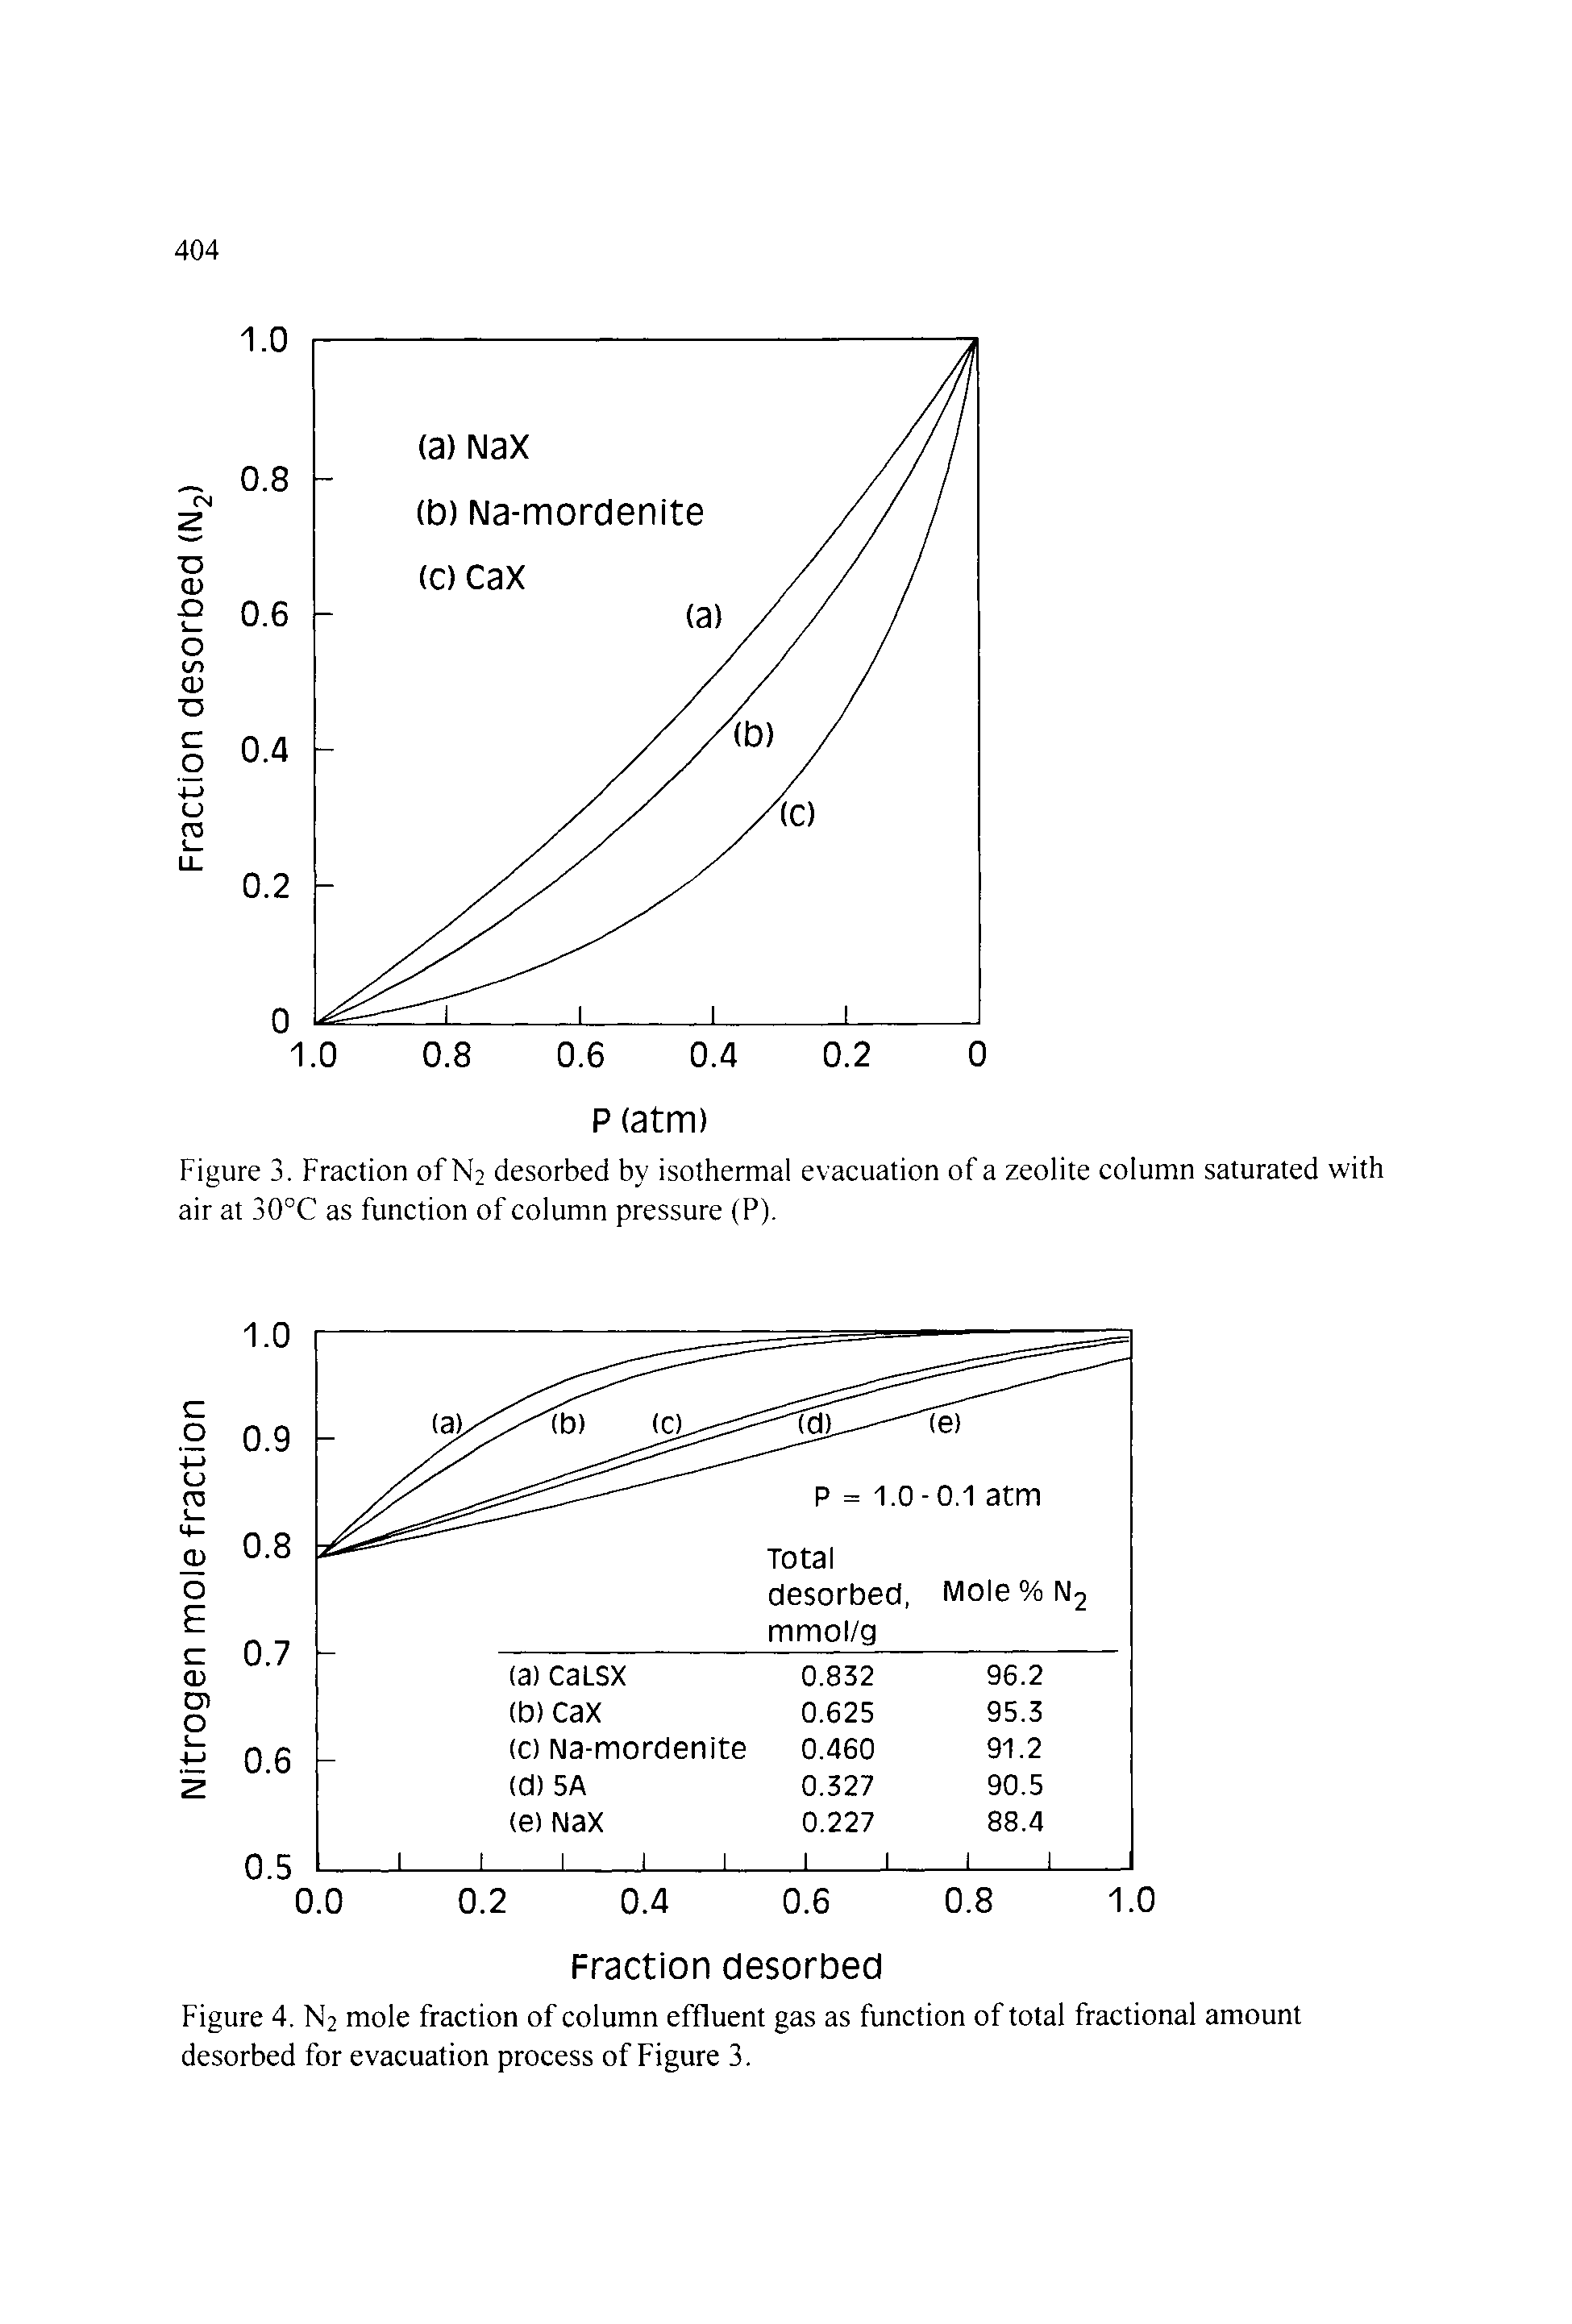 Figure 4. N2 mole fraction of column effluent gas as function of total fractional amount desorbed for evacuation process of Figure 3.